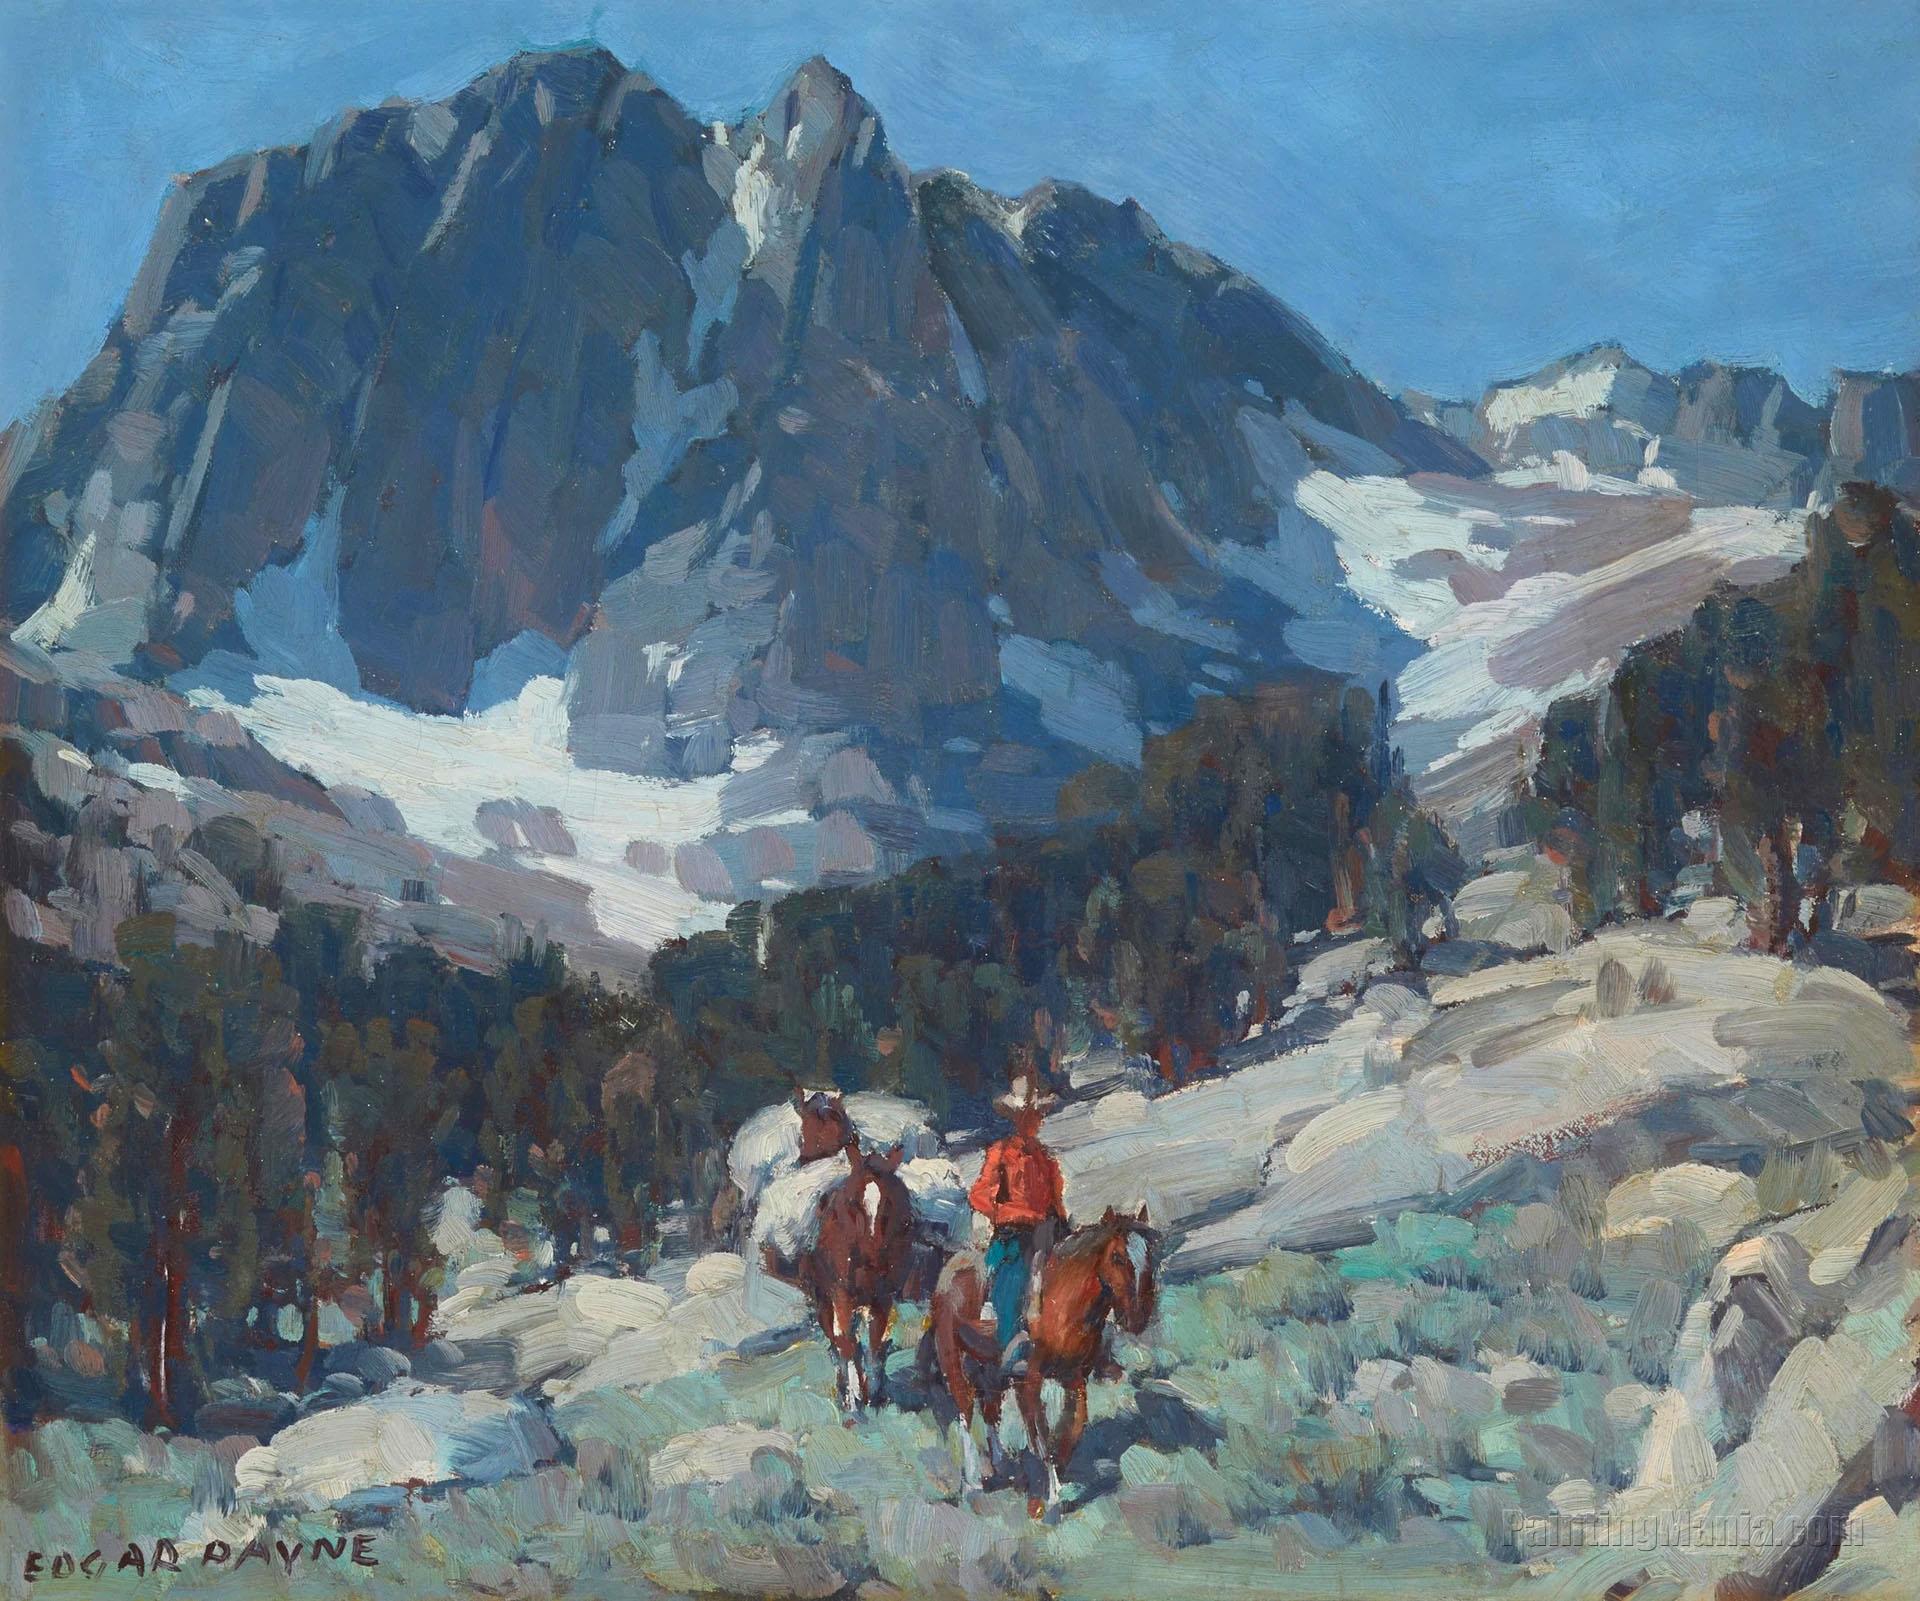 Rider on horseback with pack mules in a mountainous landscape